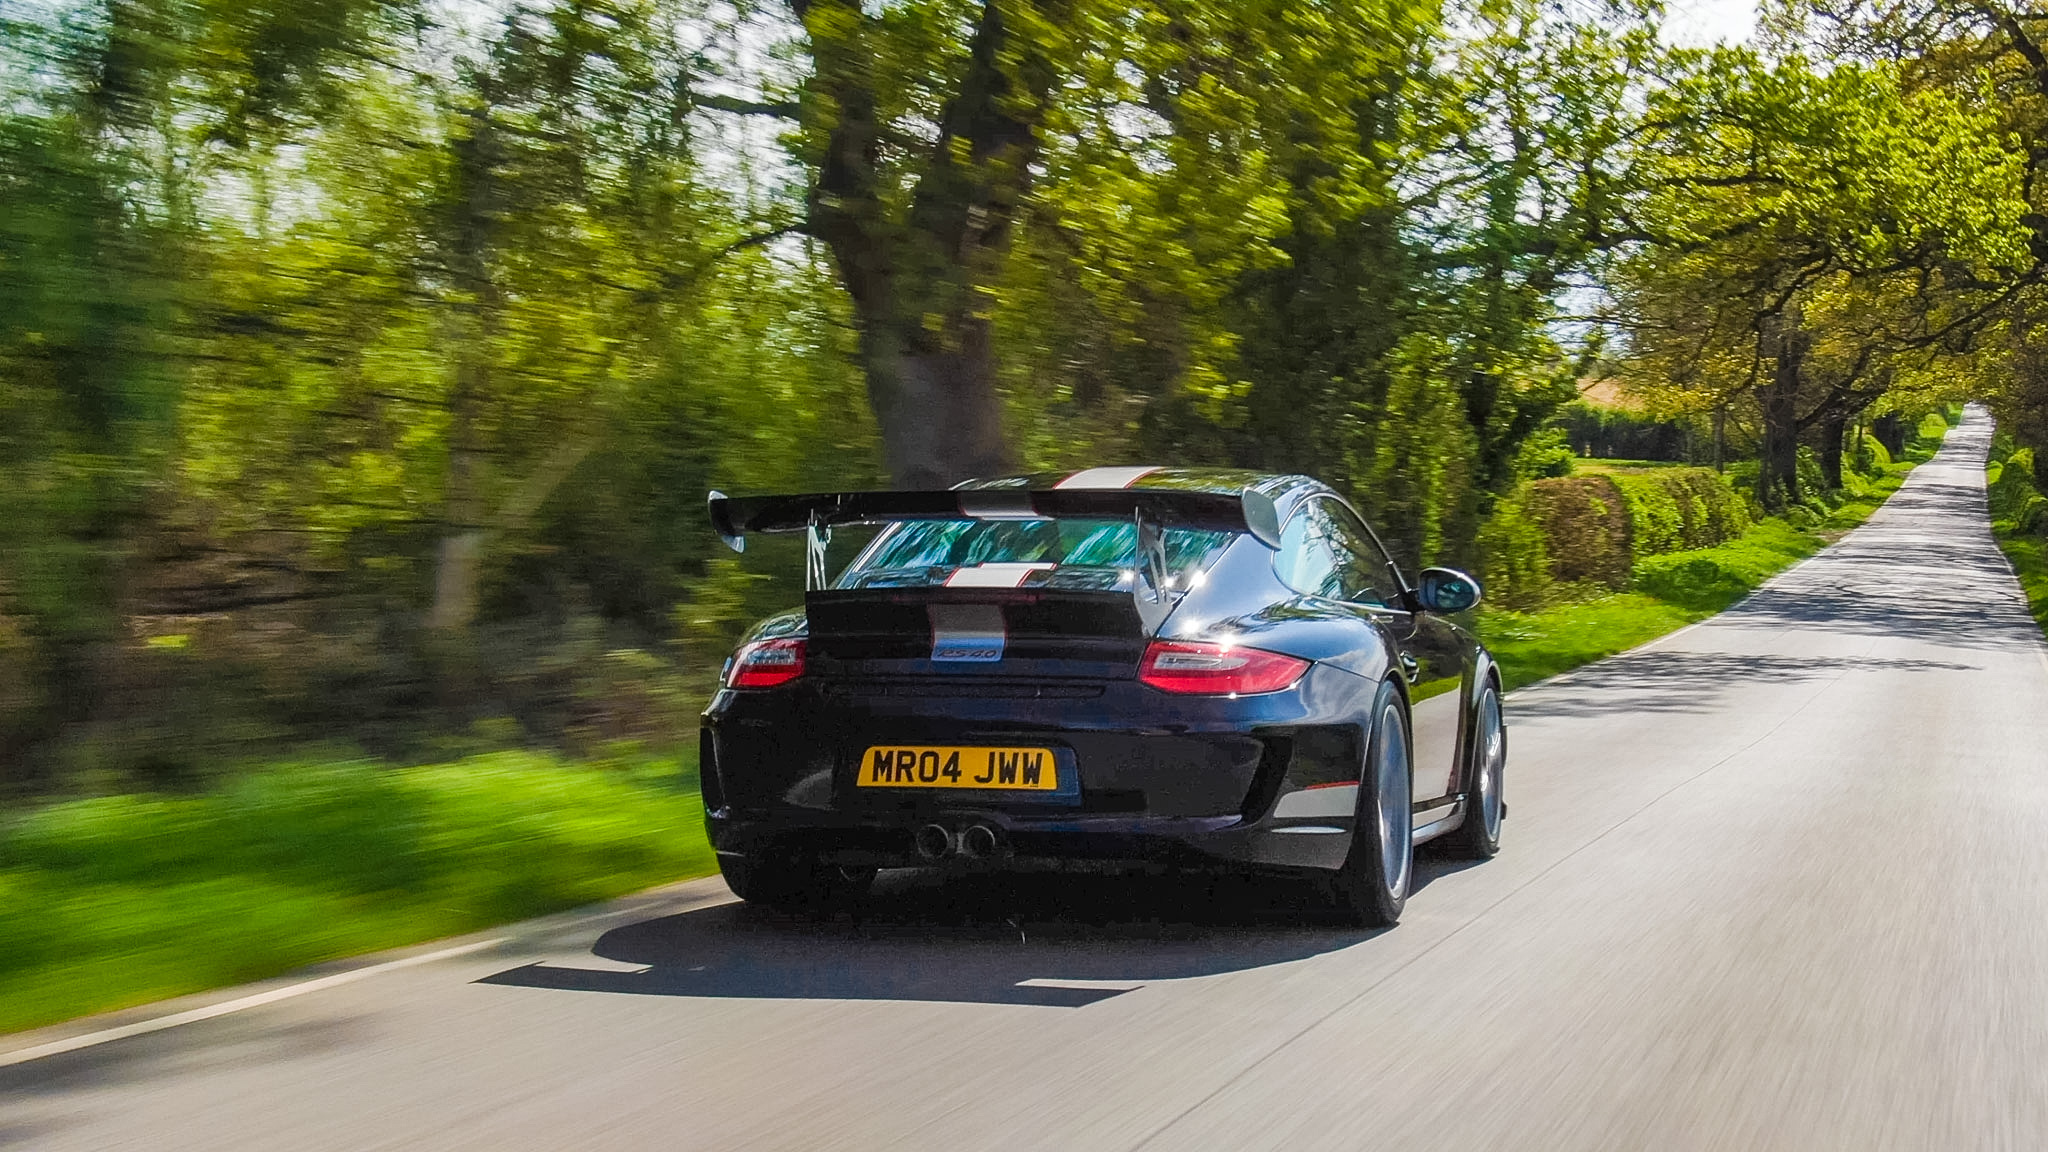 Porsche 911 GT3 RS 4.0 driving on a country road